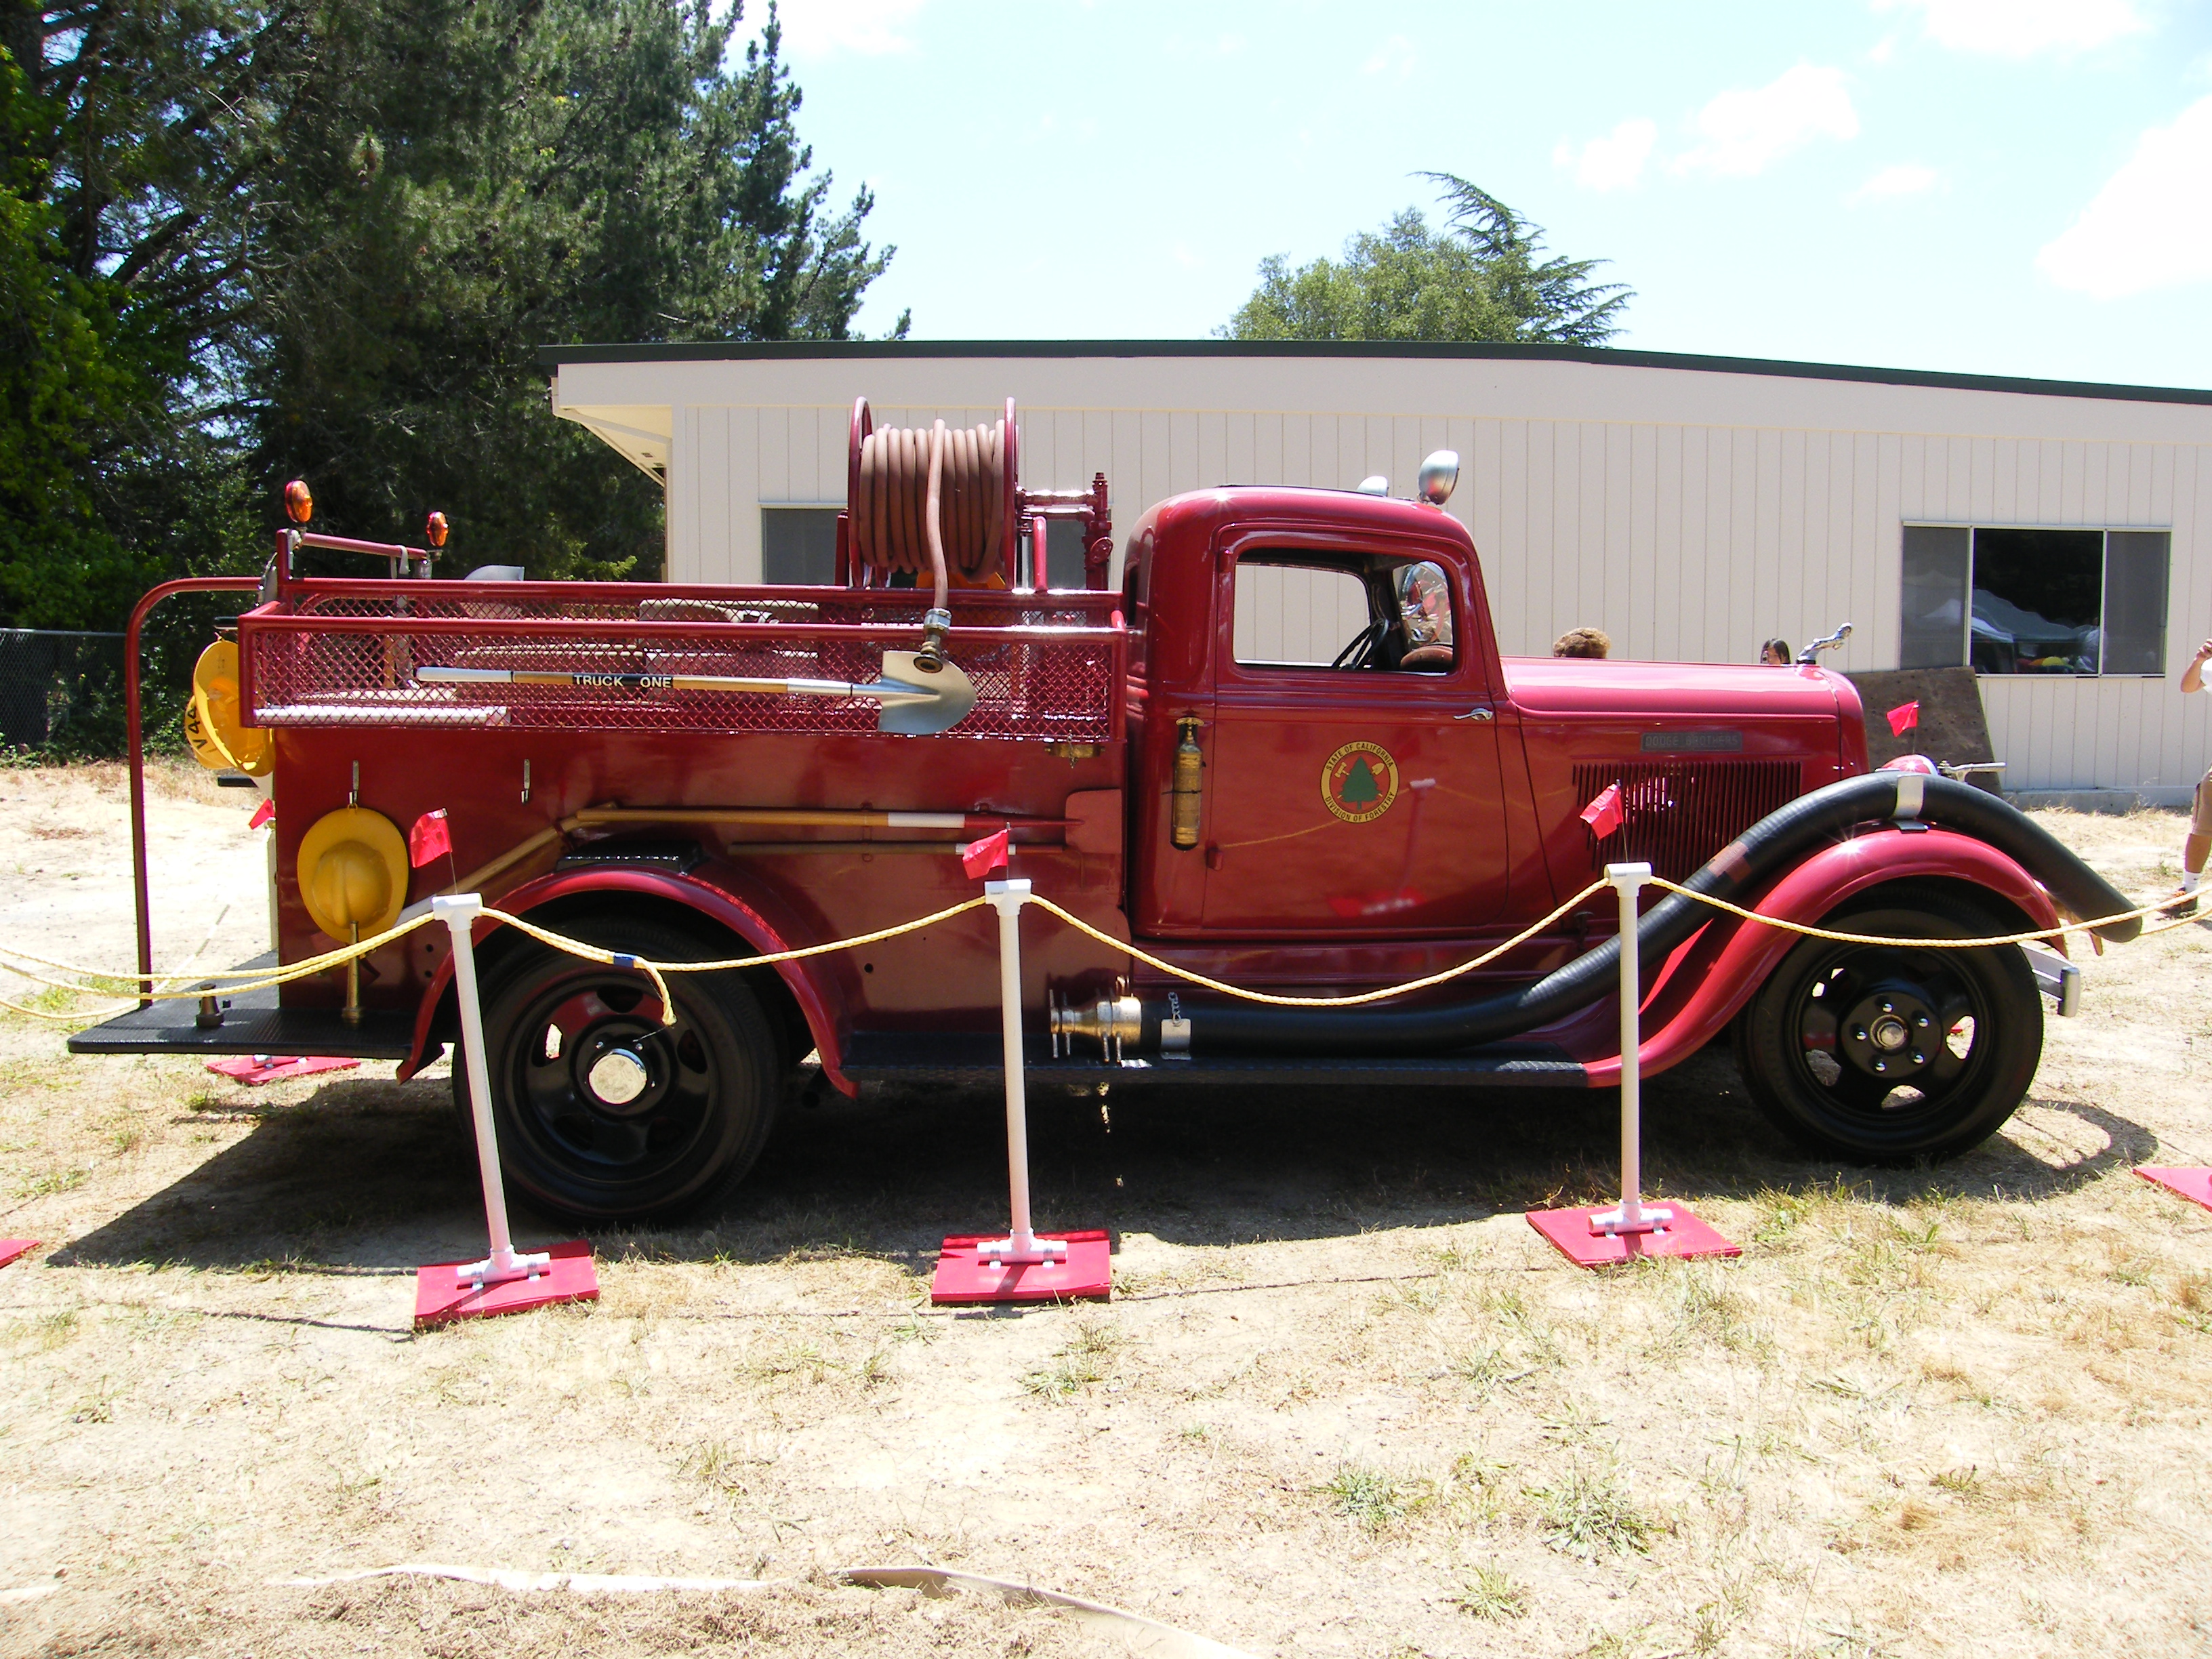 1930's Dodge fire truck | Flickr - Photo Sharing!